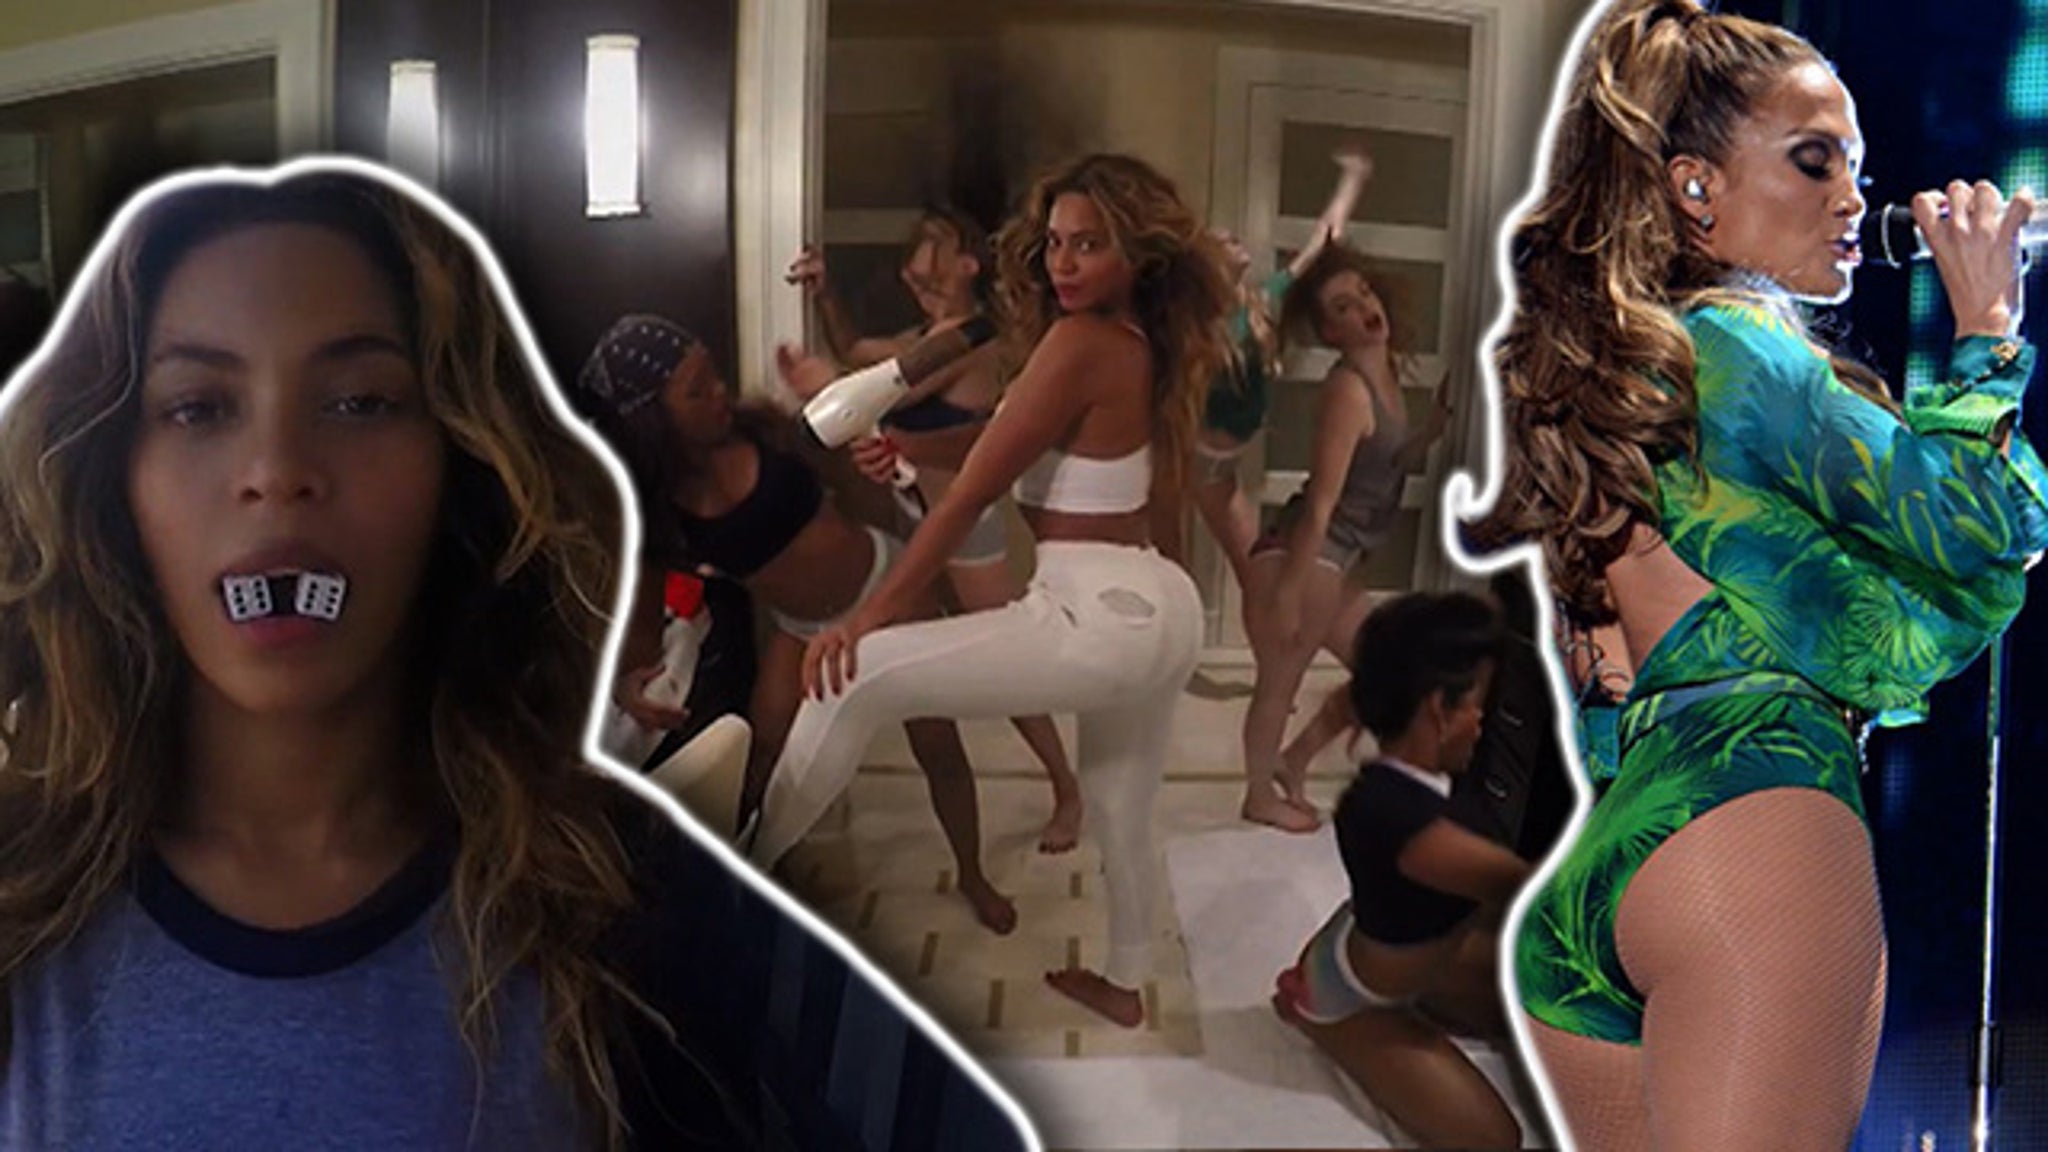 Beyonce threesome in music videos